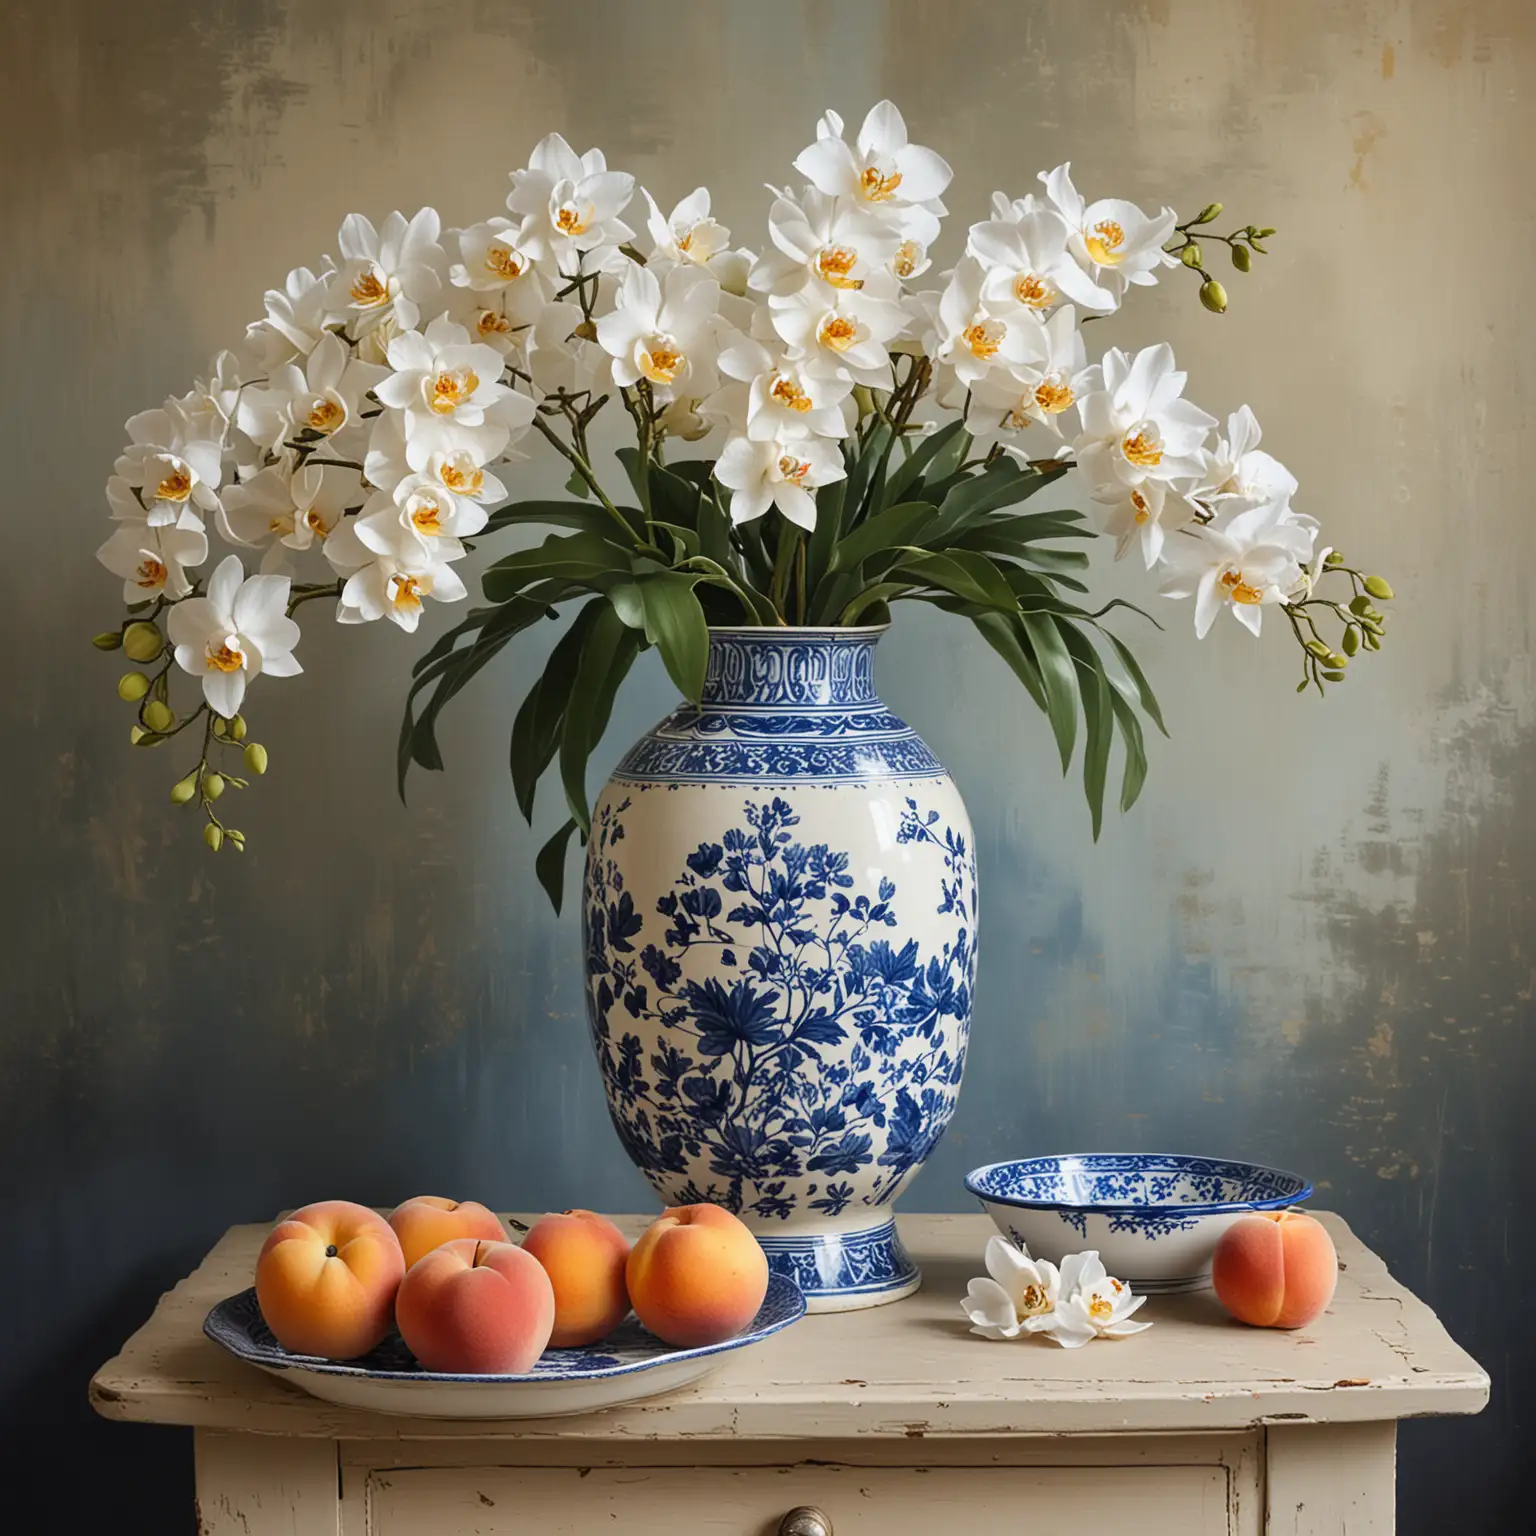 A STILL LIFE PAINTING WITH WHITE ORCHIDS IN A BLUE AND WHITE [LANTER AND A BOWL OF PEACHES ON THE TANLE WITH THE ORCHIDS